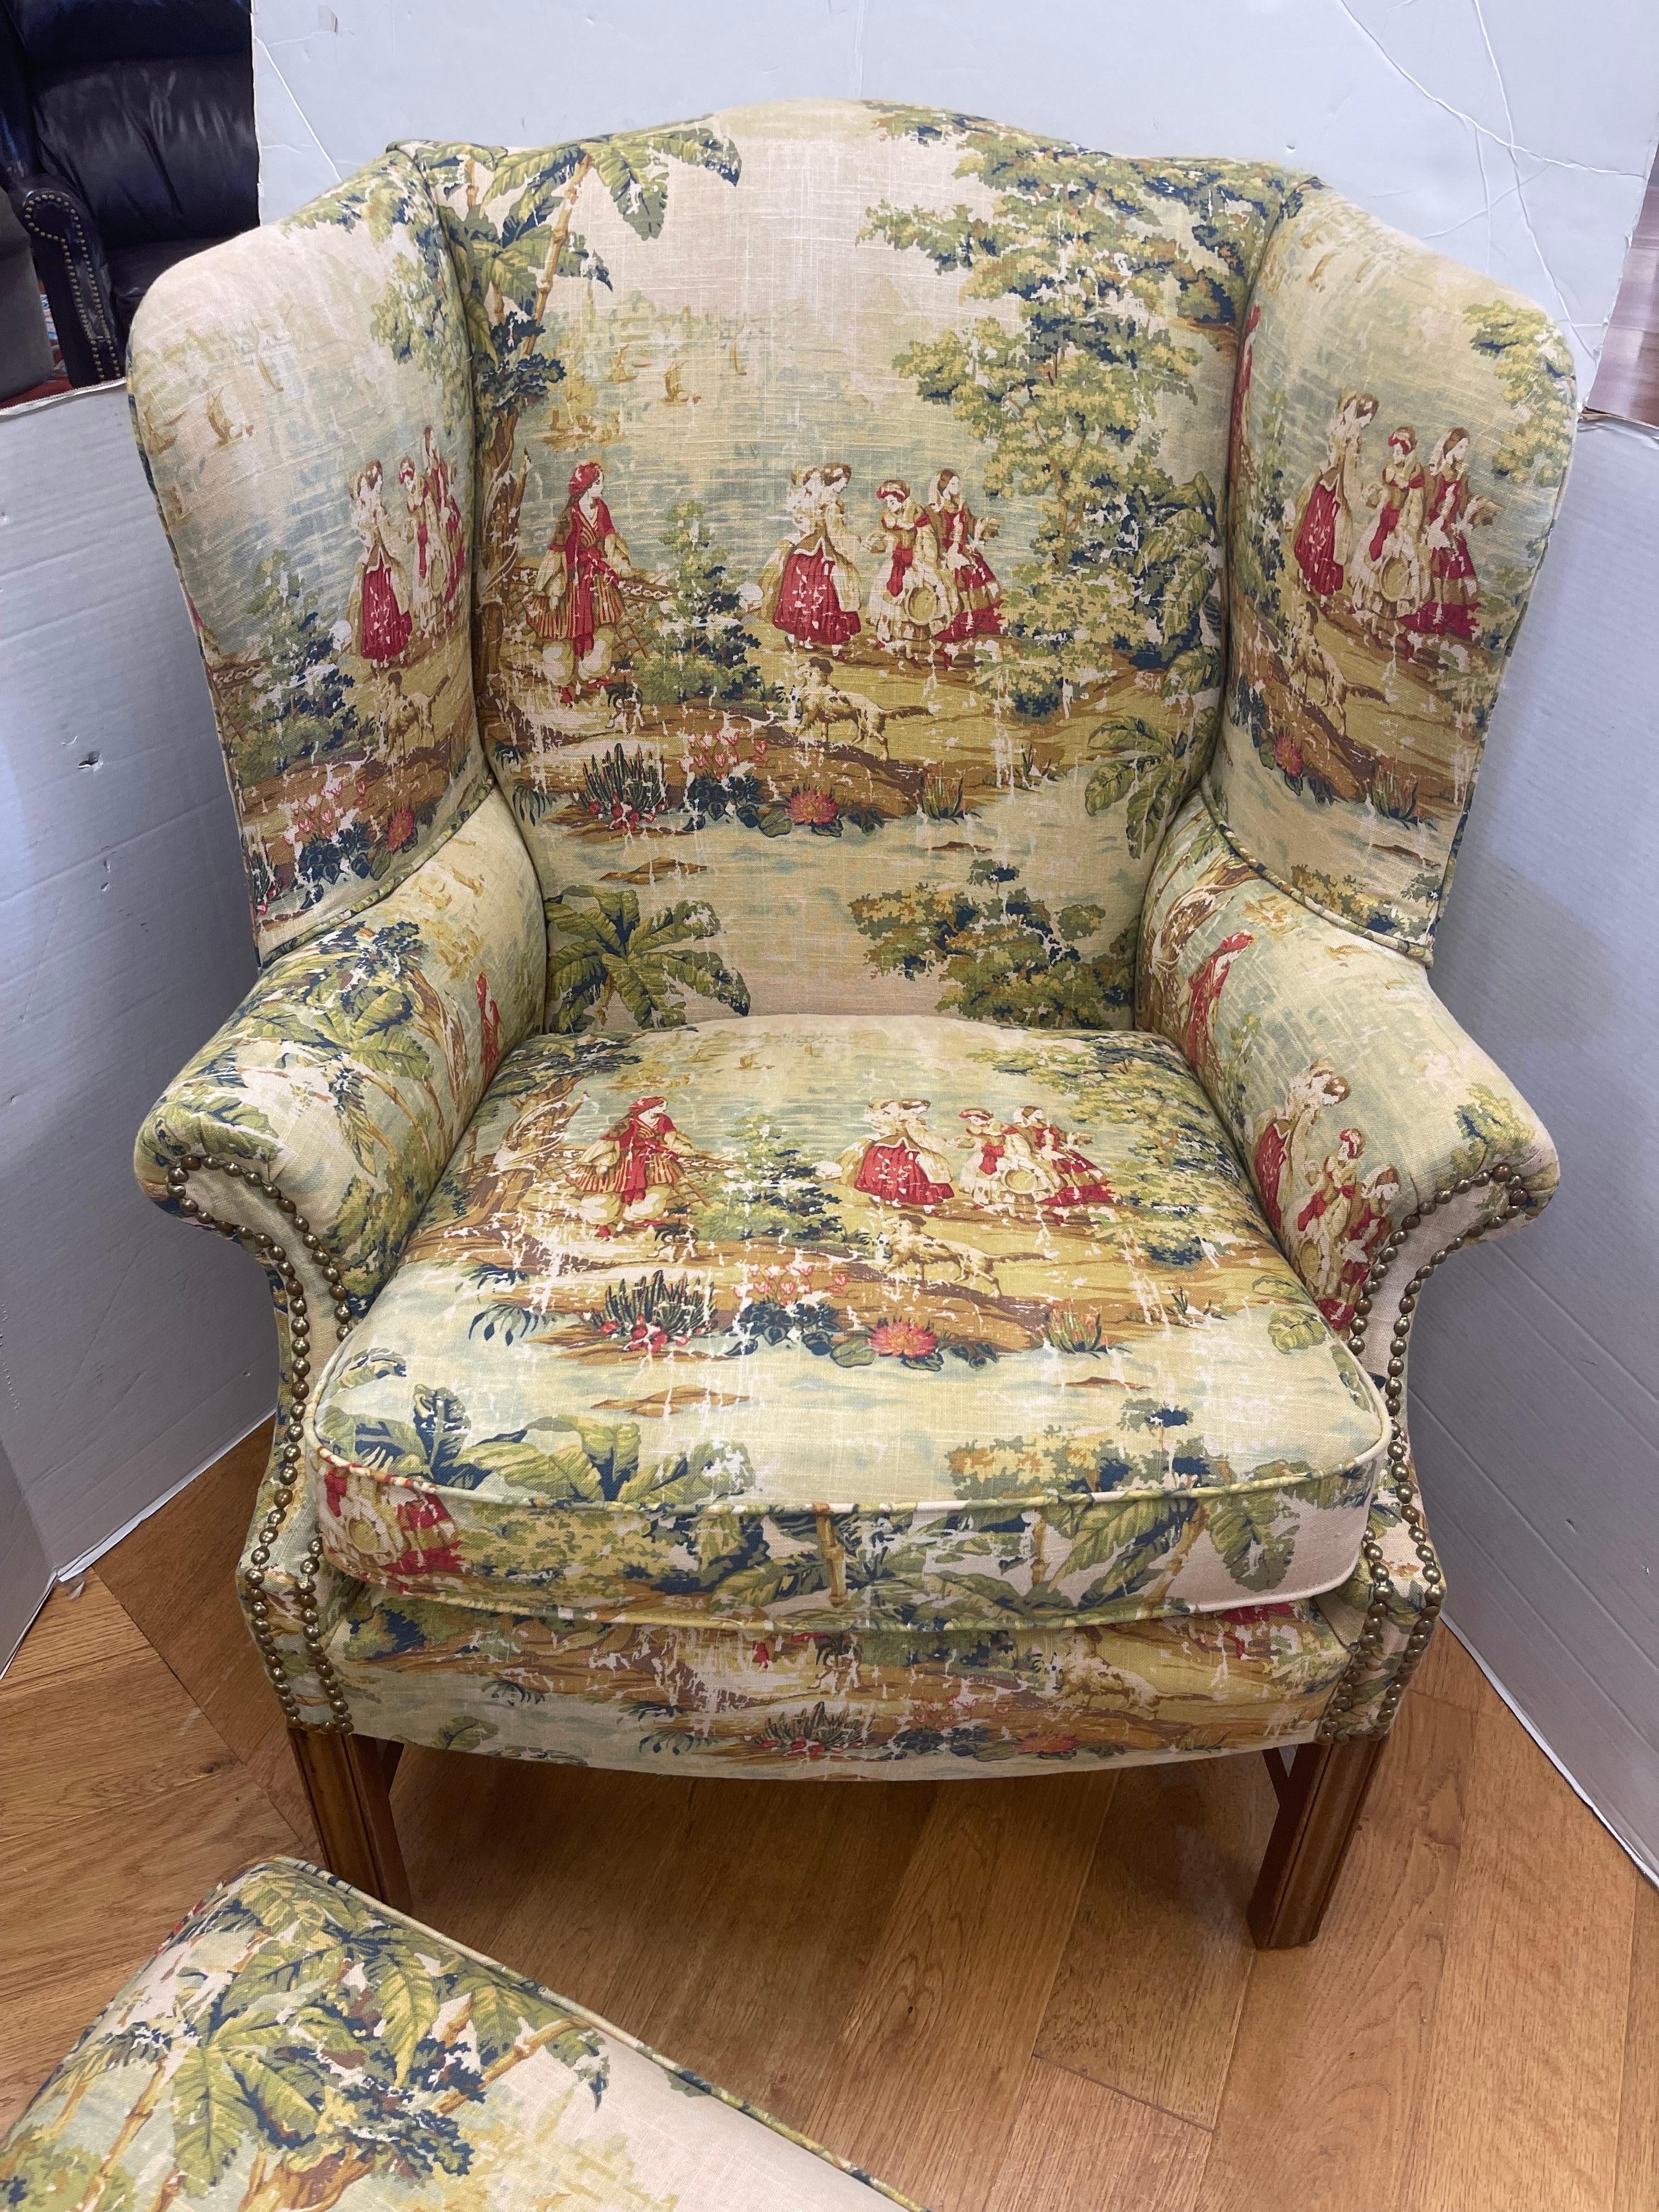 Stunning wingback chair and matching ottoman with new French toile upholstery and nailheads throughout. The piece sits exceptionally and the fabric is sublime. Excellent condition. Why not own the best?